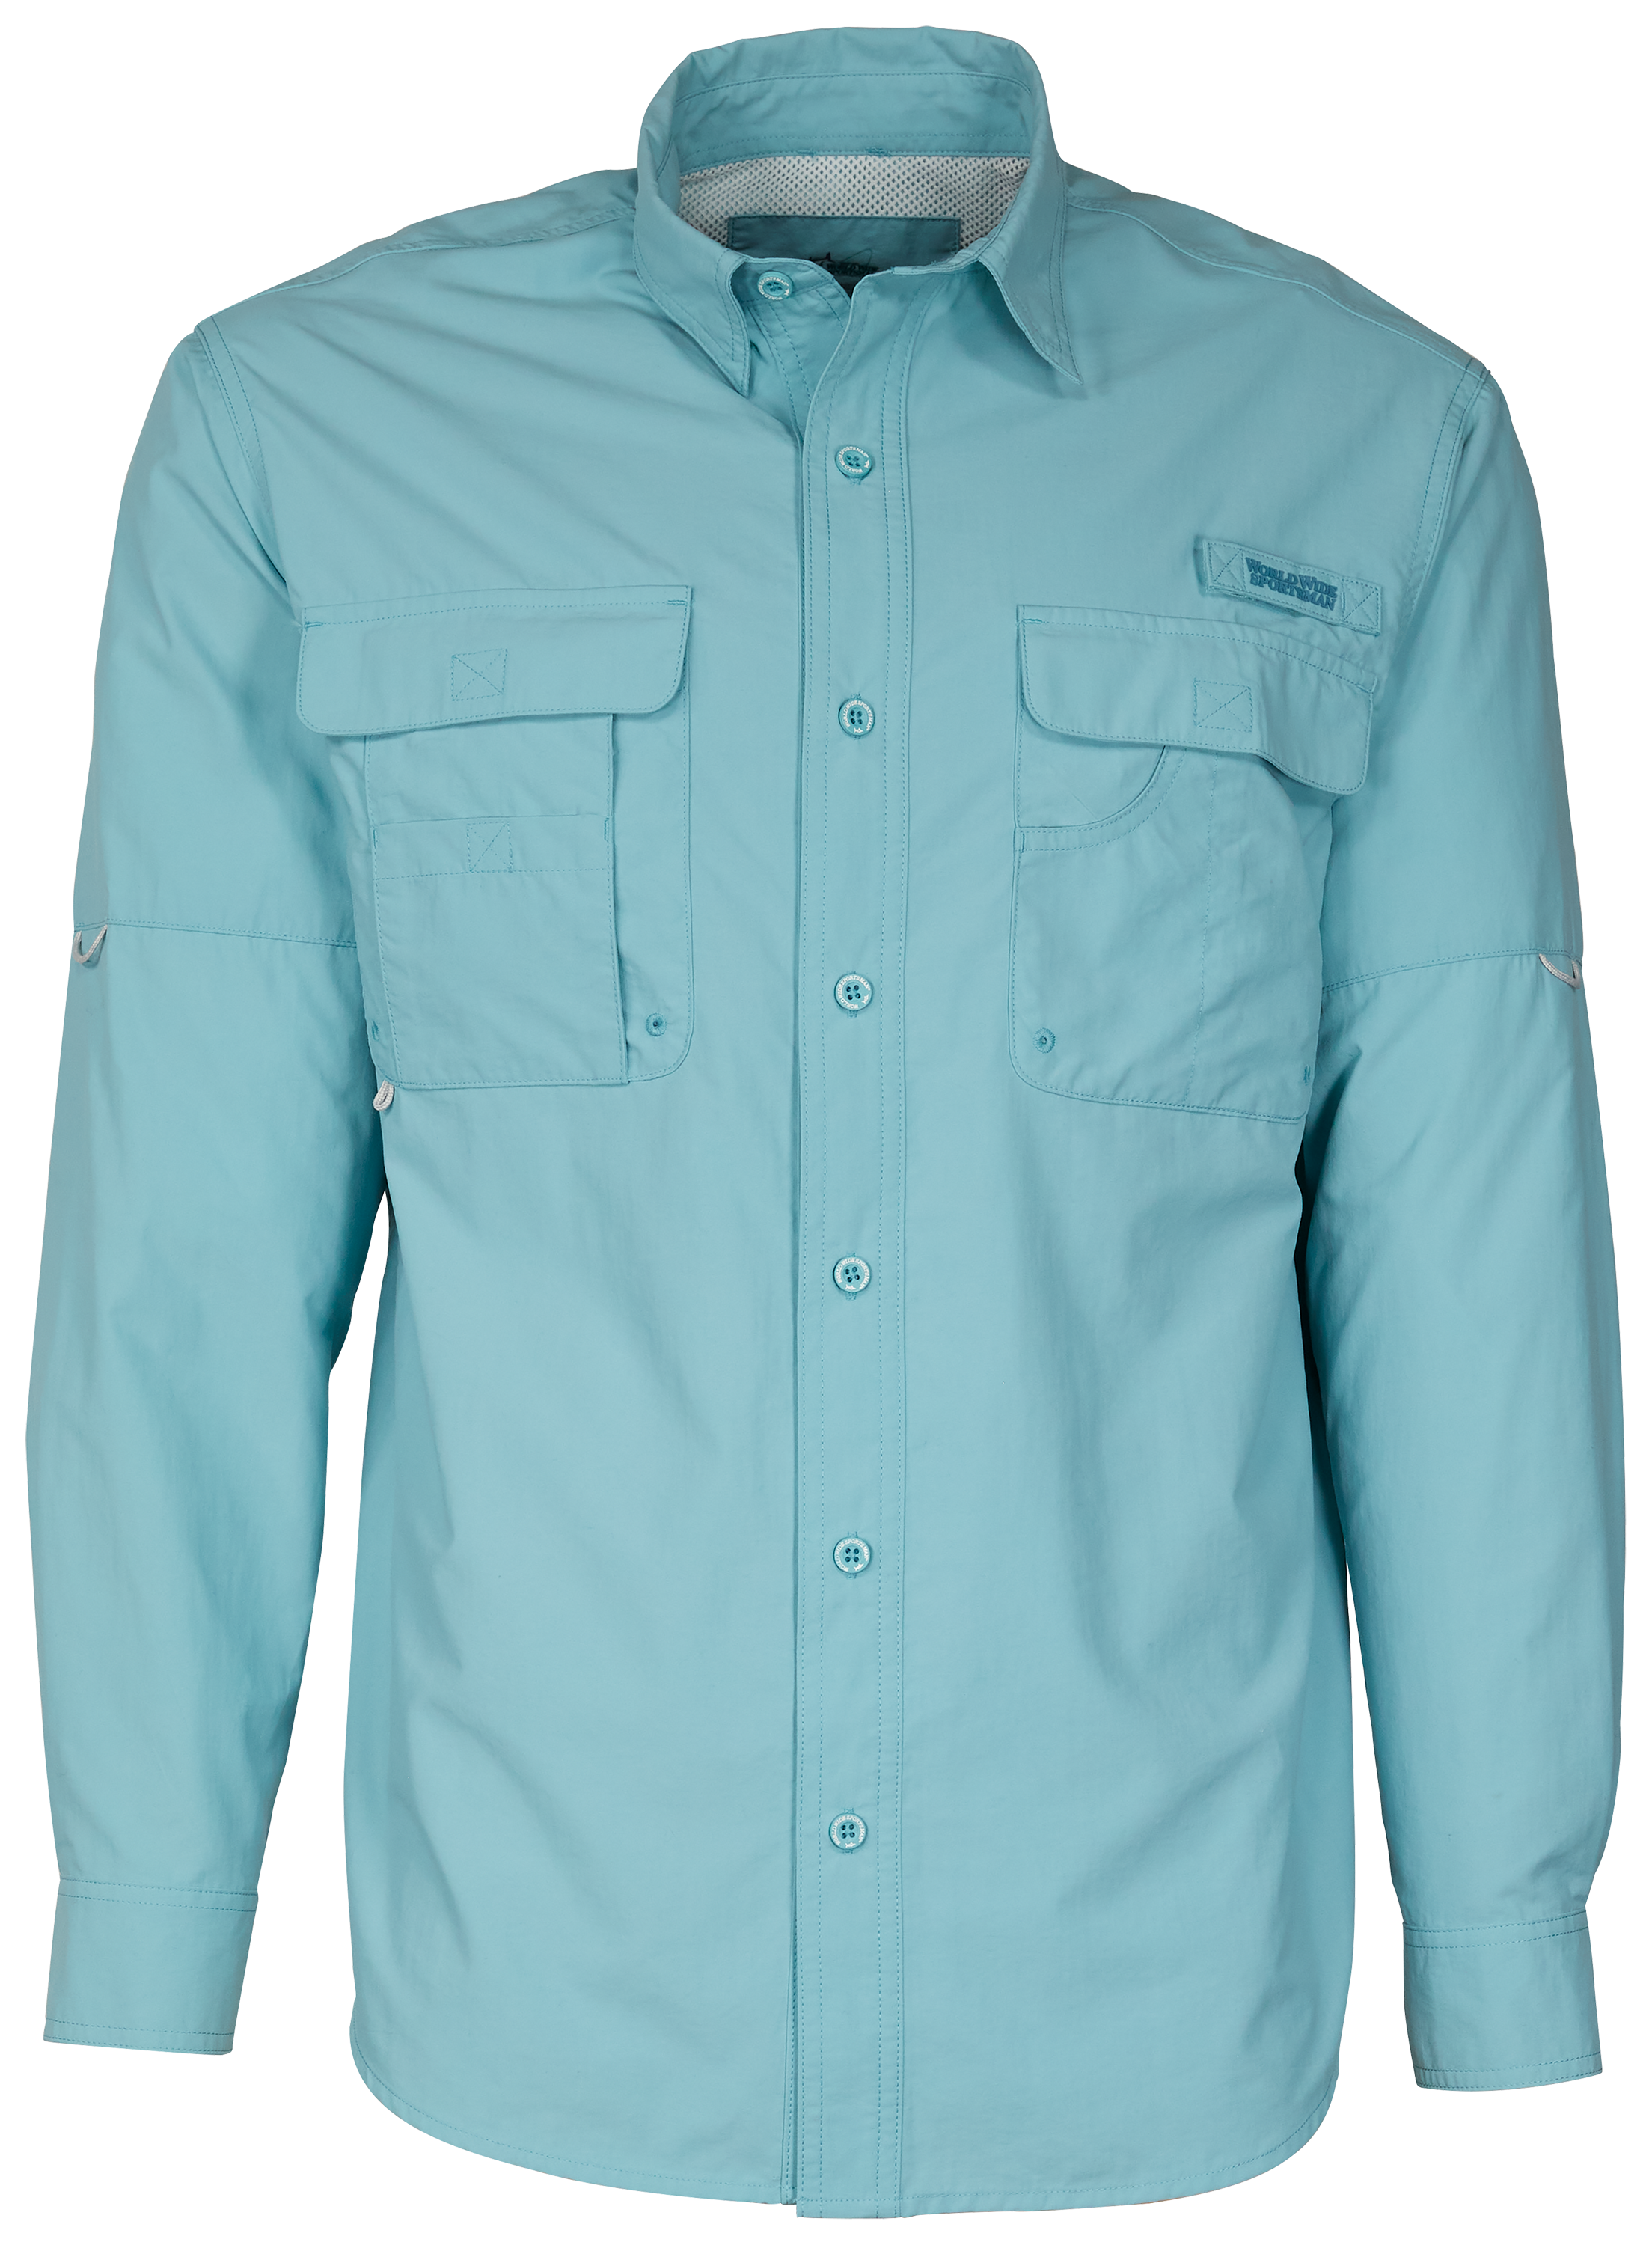 Cabela's Fishing Shirts & Tops for sale